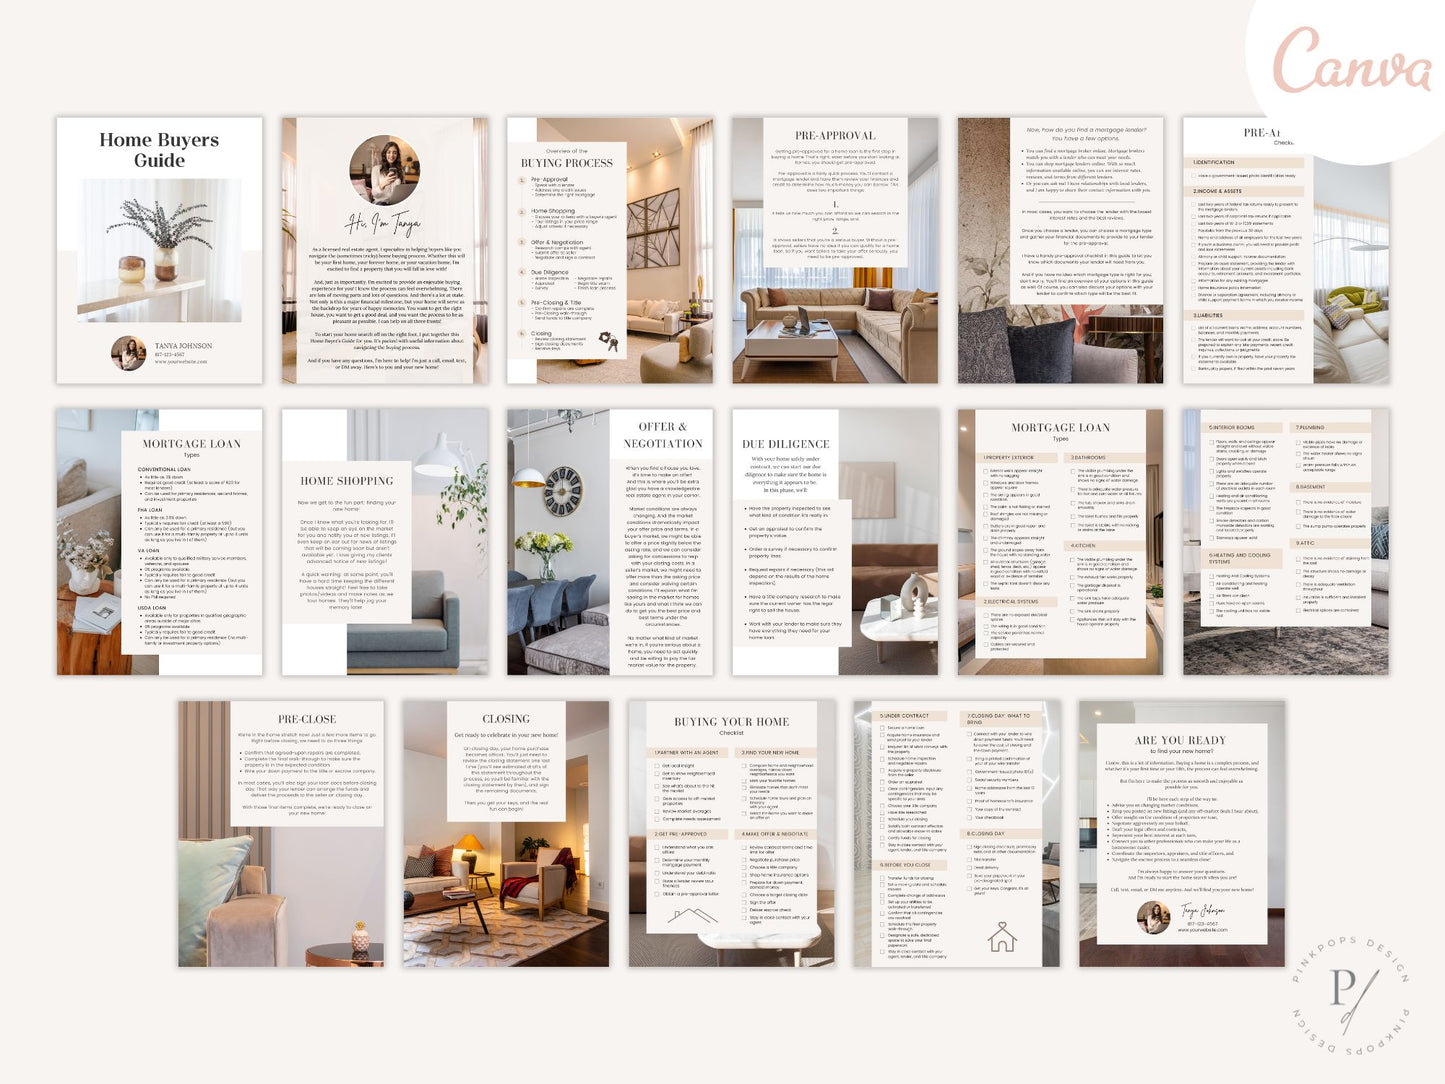 Home Buyer and Seller Guide Bundle Vol 03 - Elevate your real estate journey with this comprehensive package. Packed with valuable insights, checklists, and expert advice for successful home buying and selling experiences.